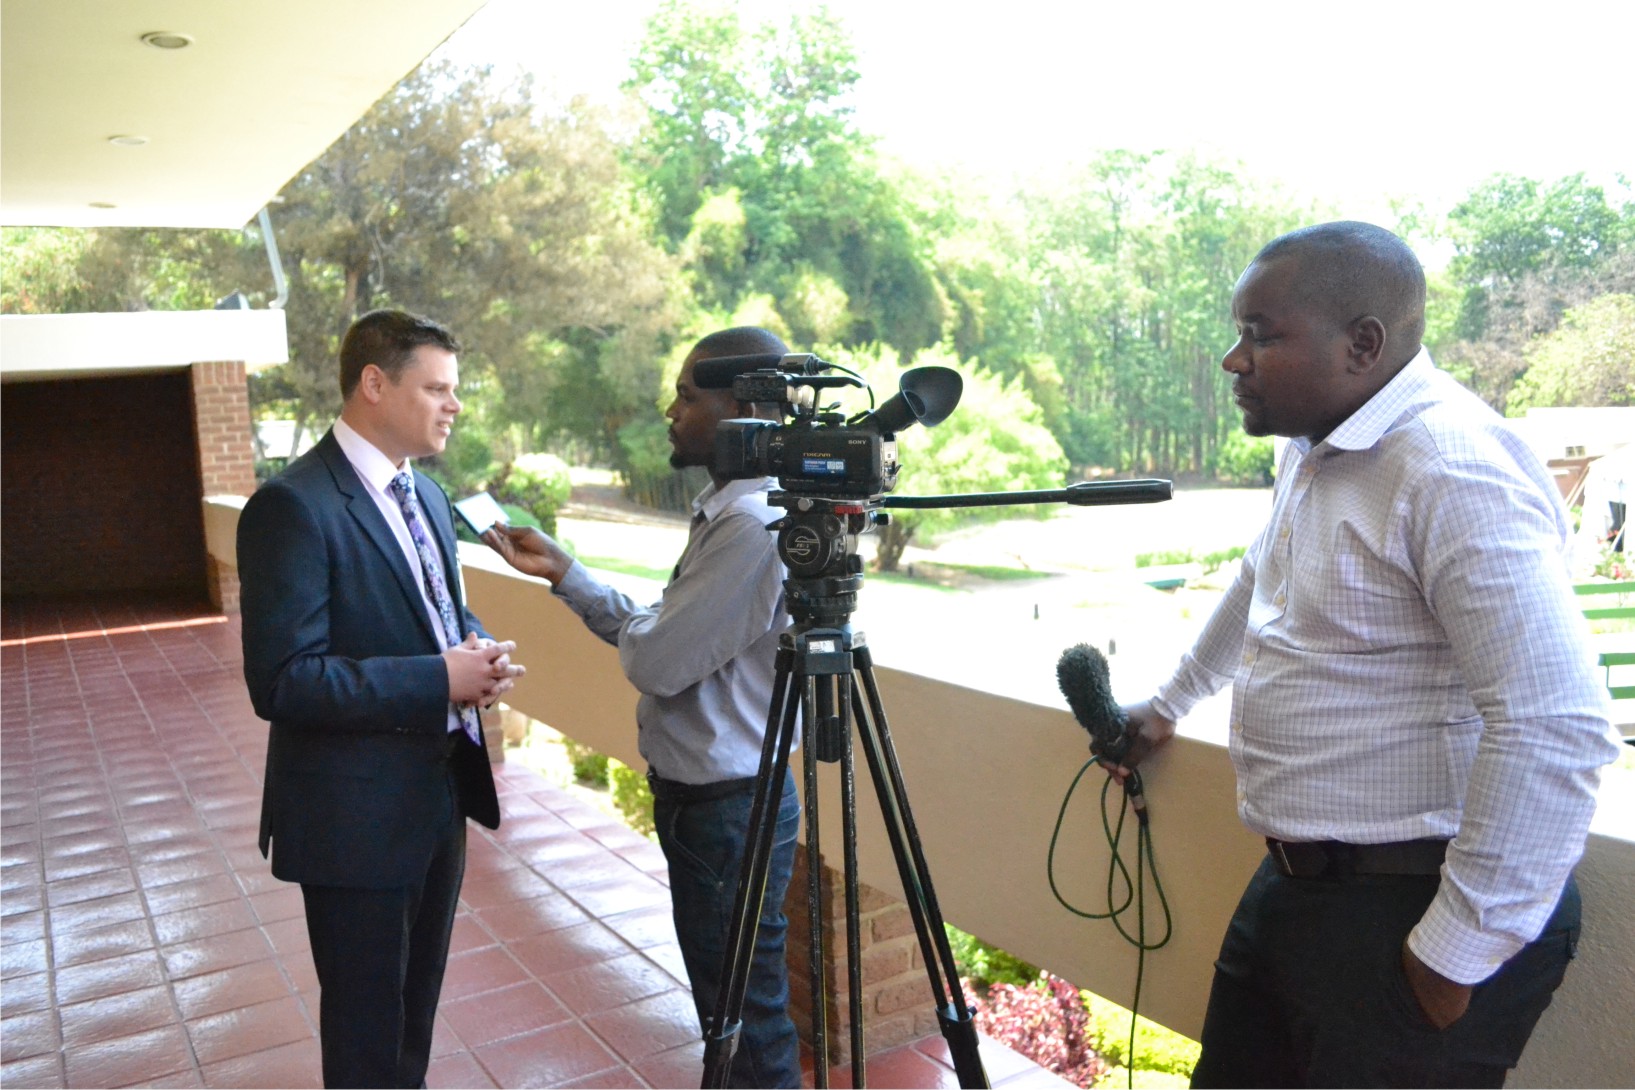 Paul Roseveare Interview with Malawi TV